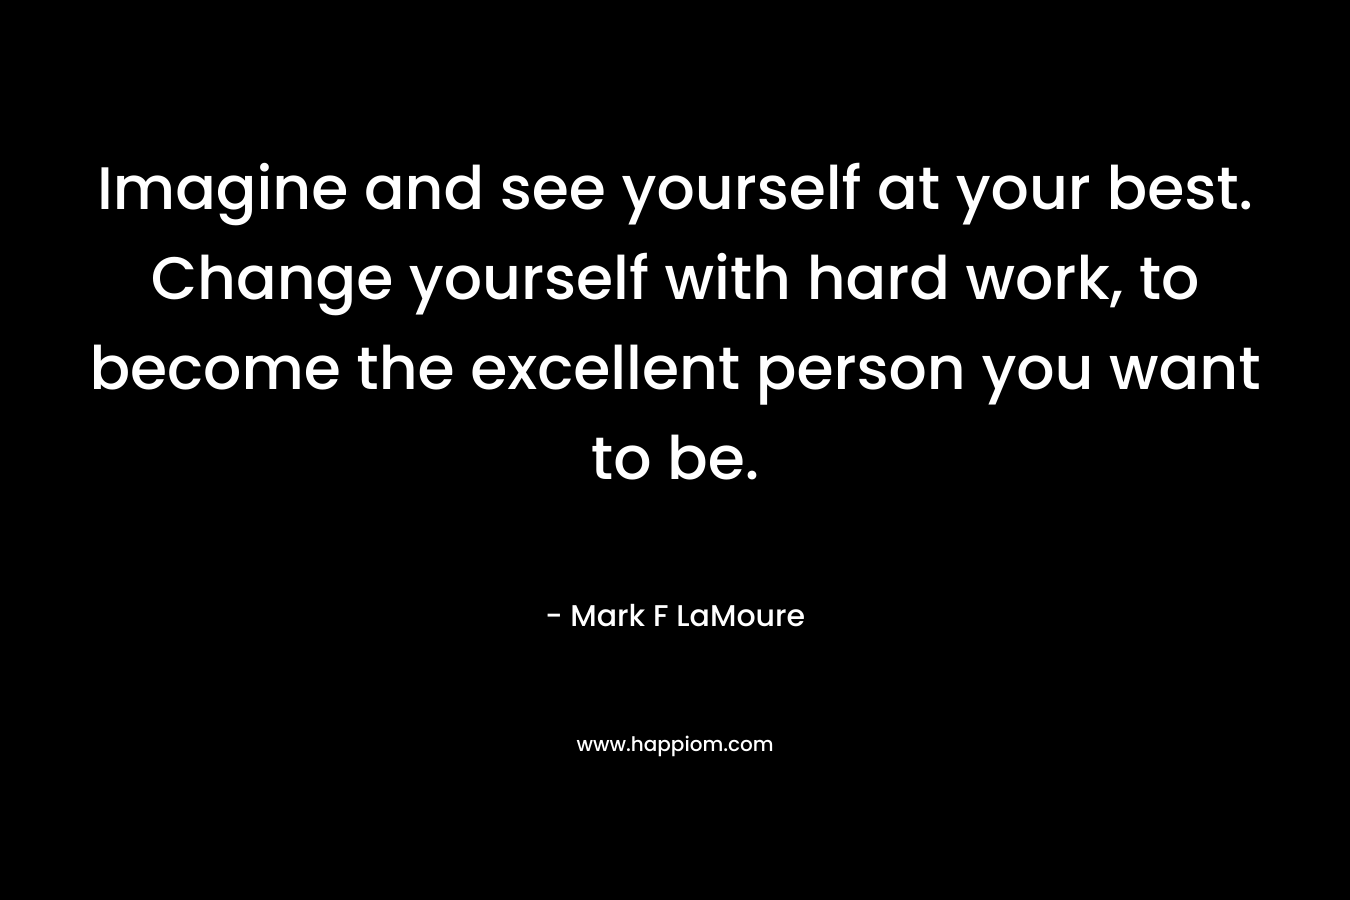 Imagine and see yourself at your best. Change yourself with hard work, to become the excellent person you want to be.